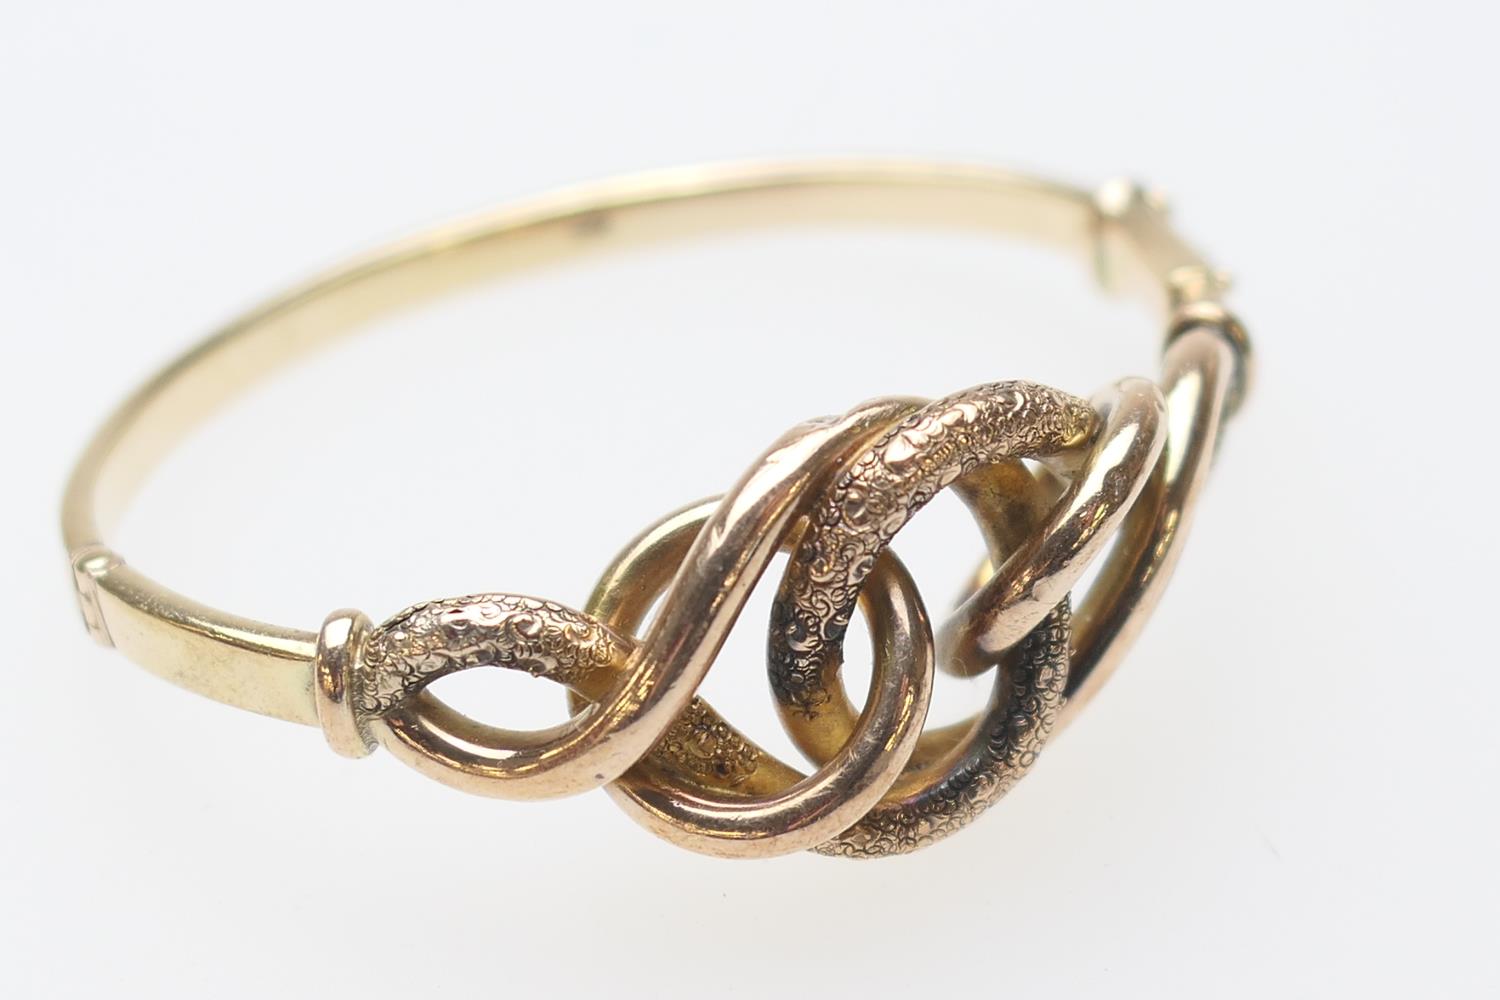 9ct gold hinged bangle, formed as an openwork knot, with a textured finish, cuff size 57mm, weight